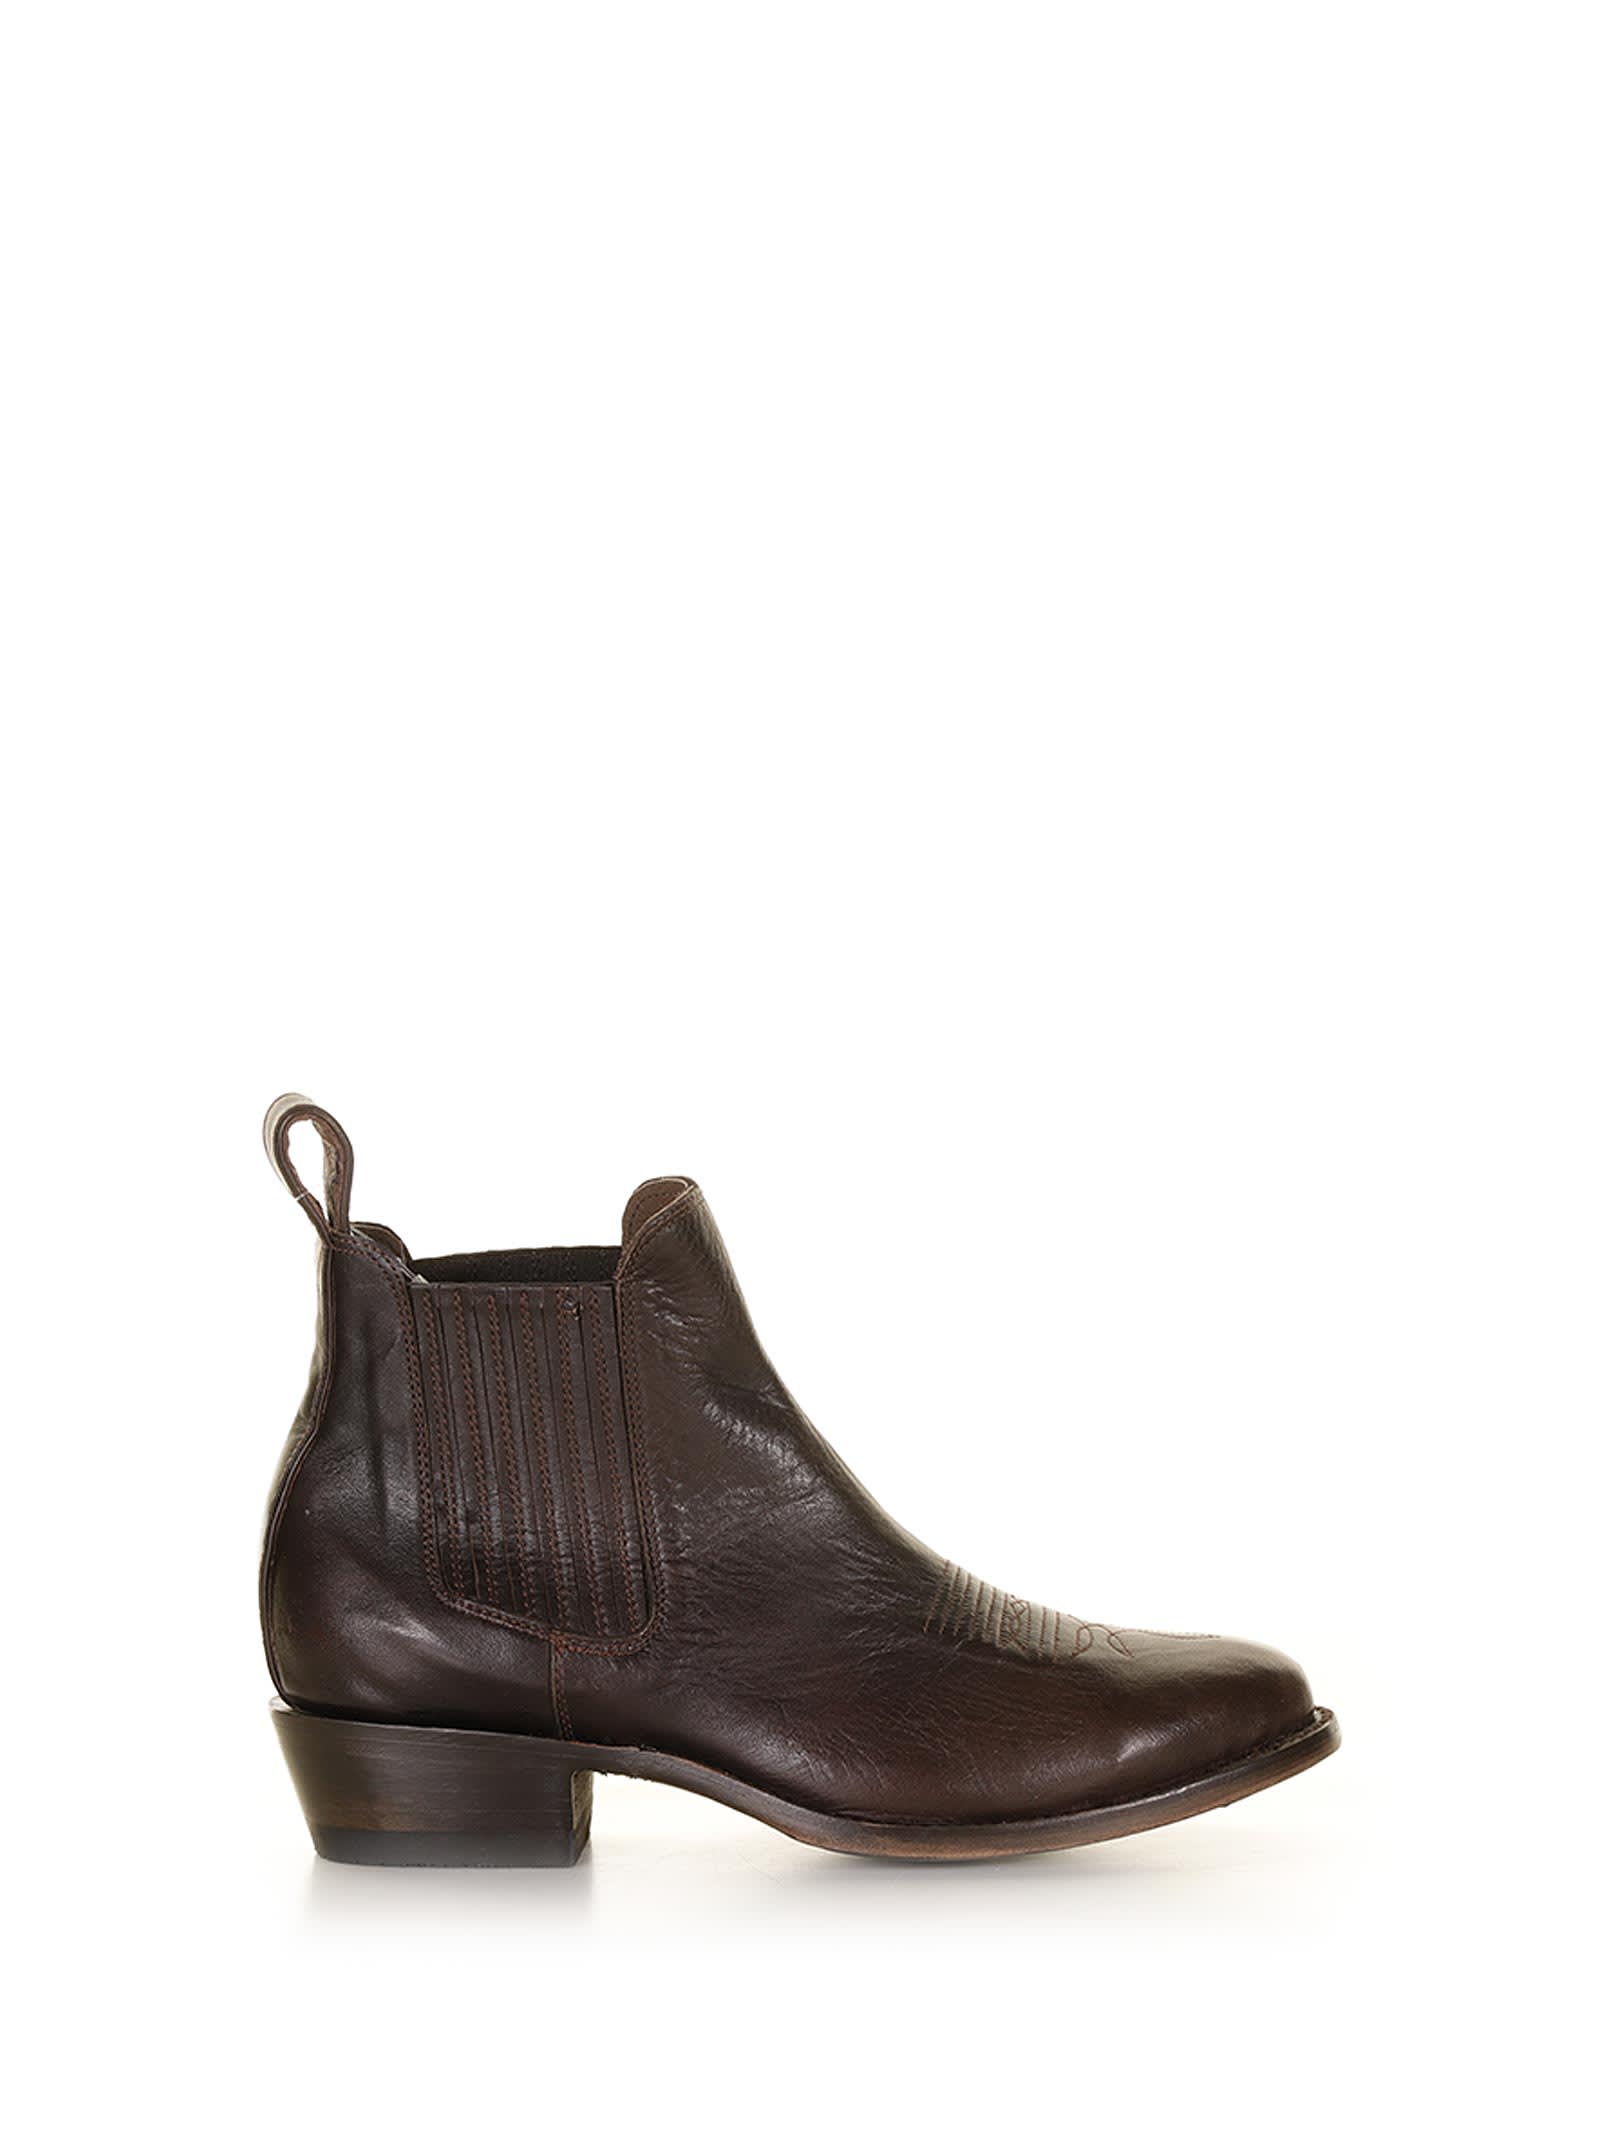 Mexicana Cowboy Style Rounded Toe Ankle Boot In Choco Ranchero